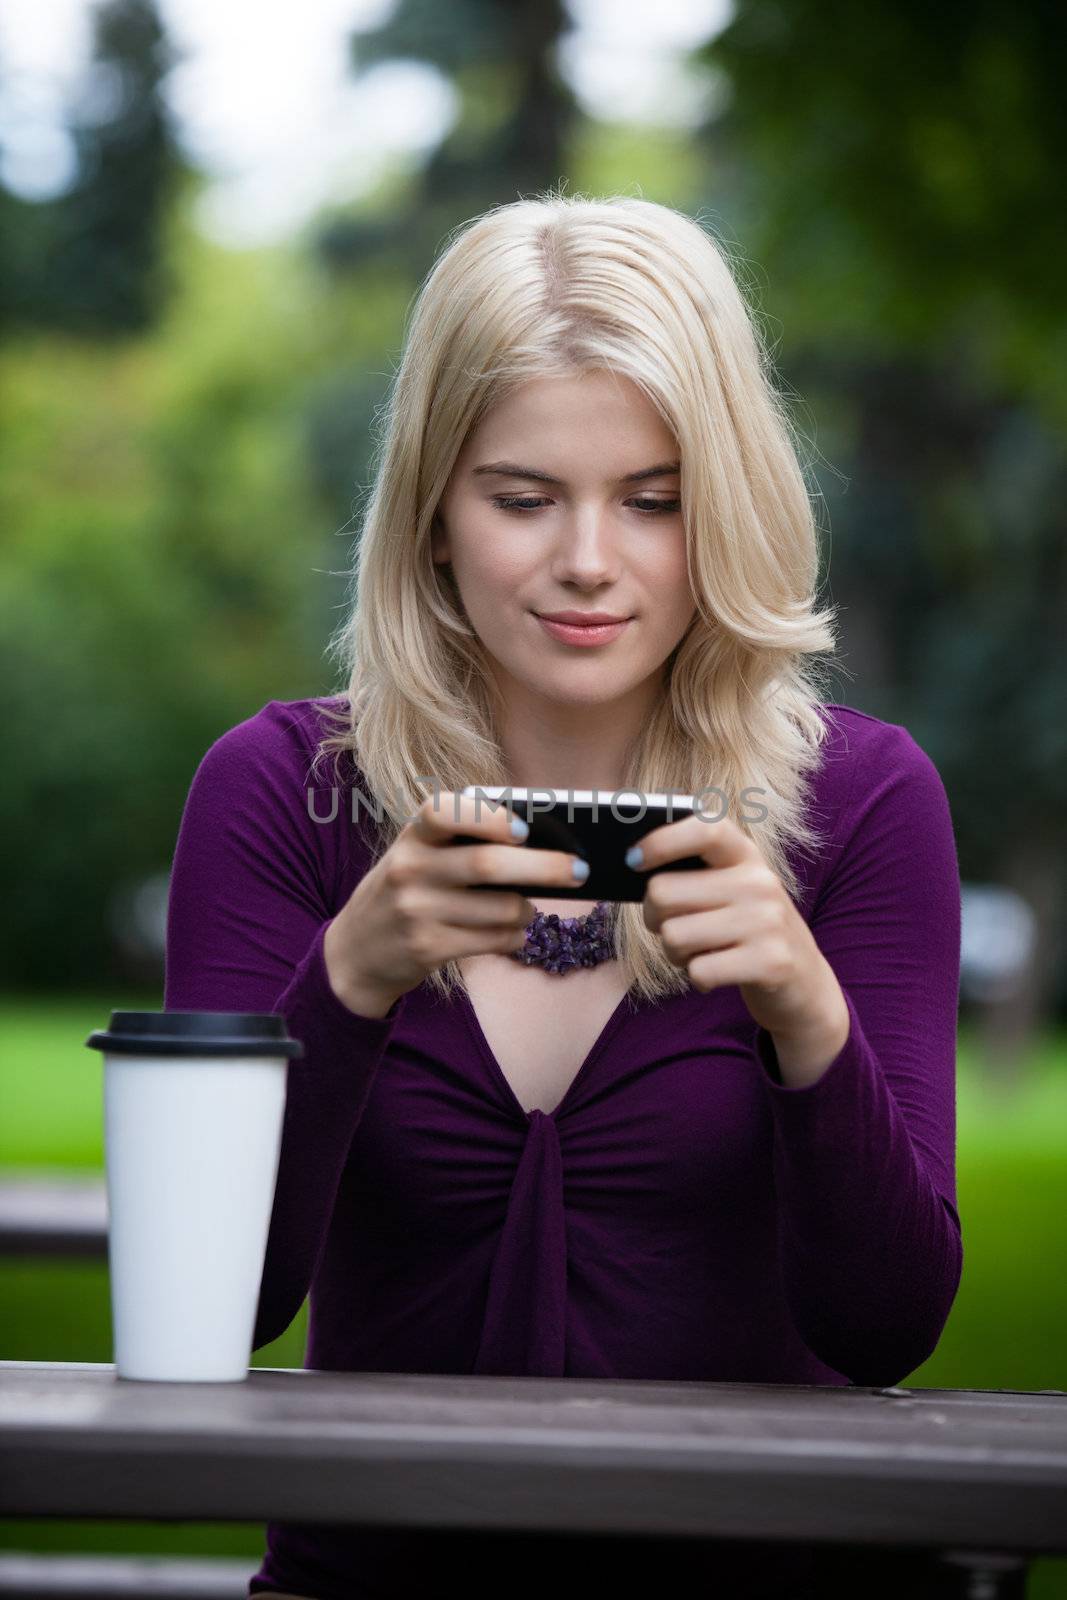 Portrait of beautiful college student using cell phone in park